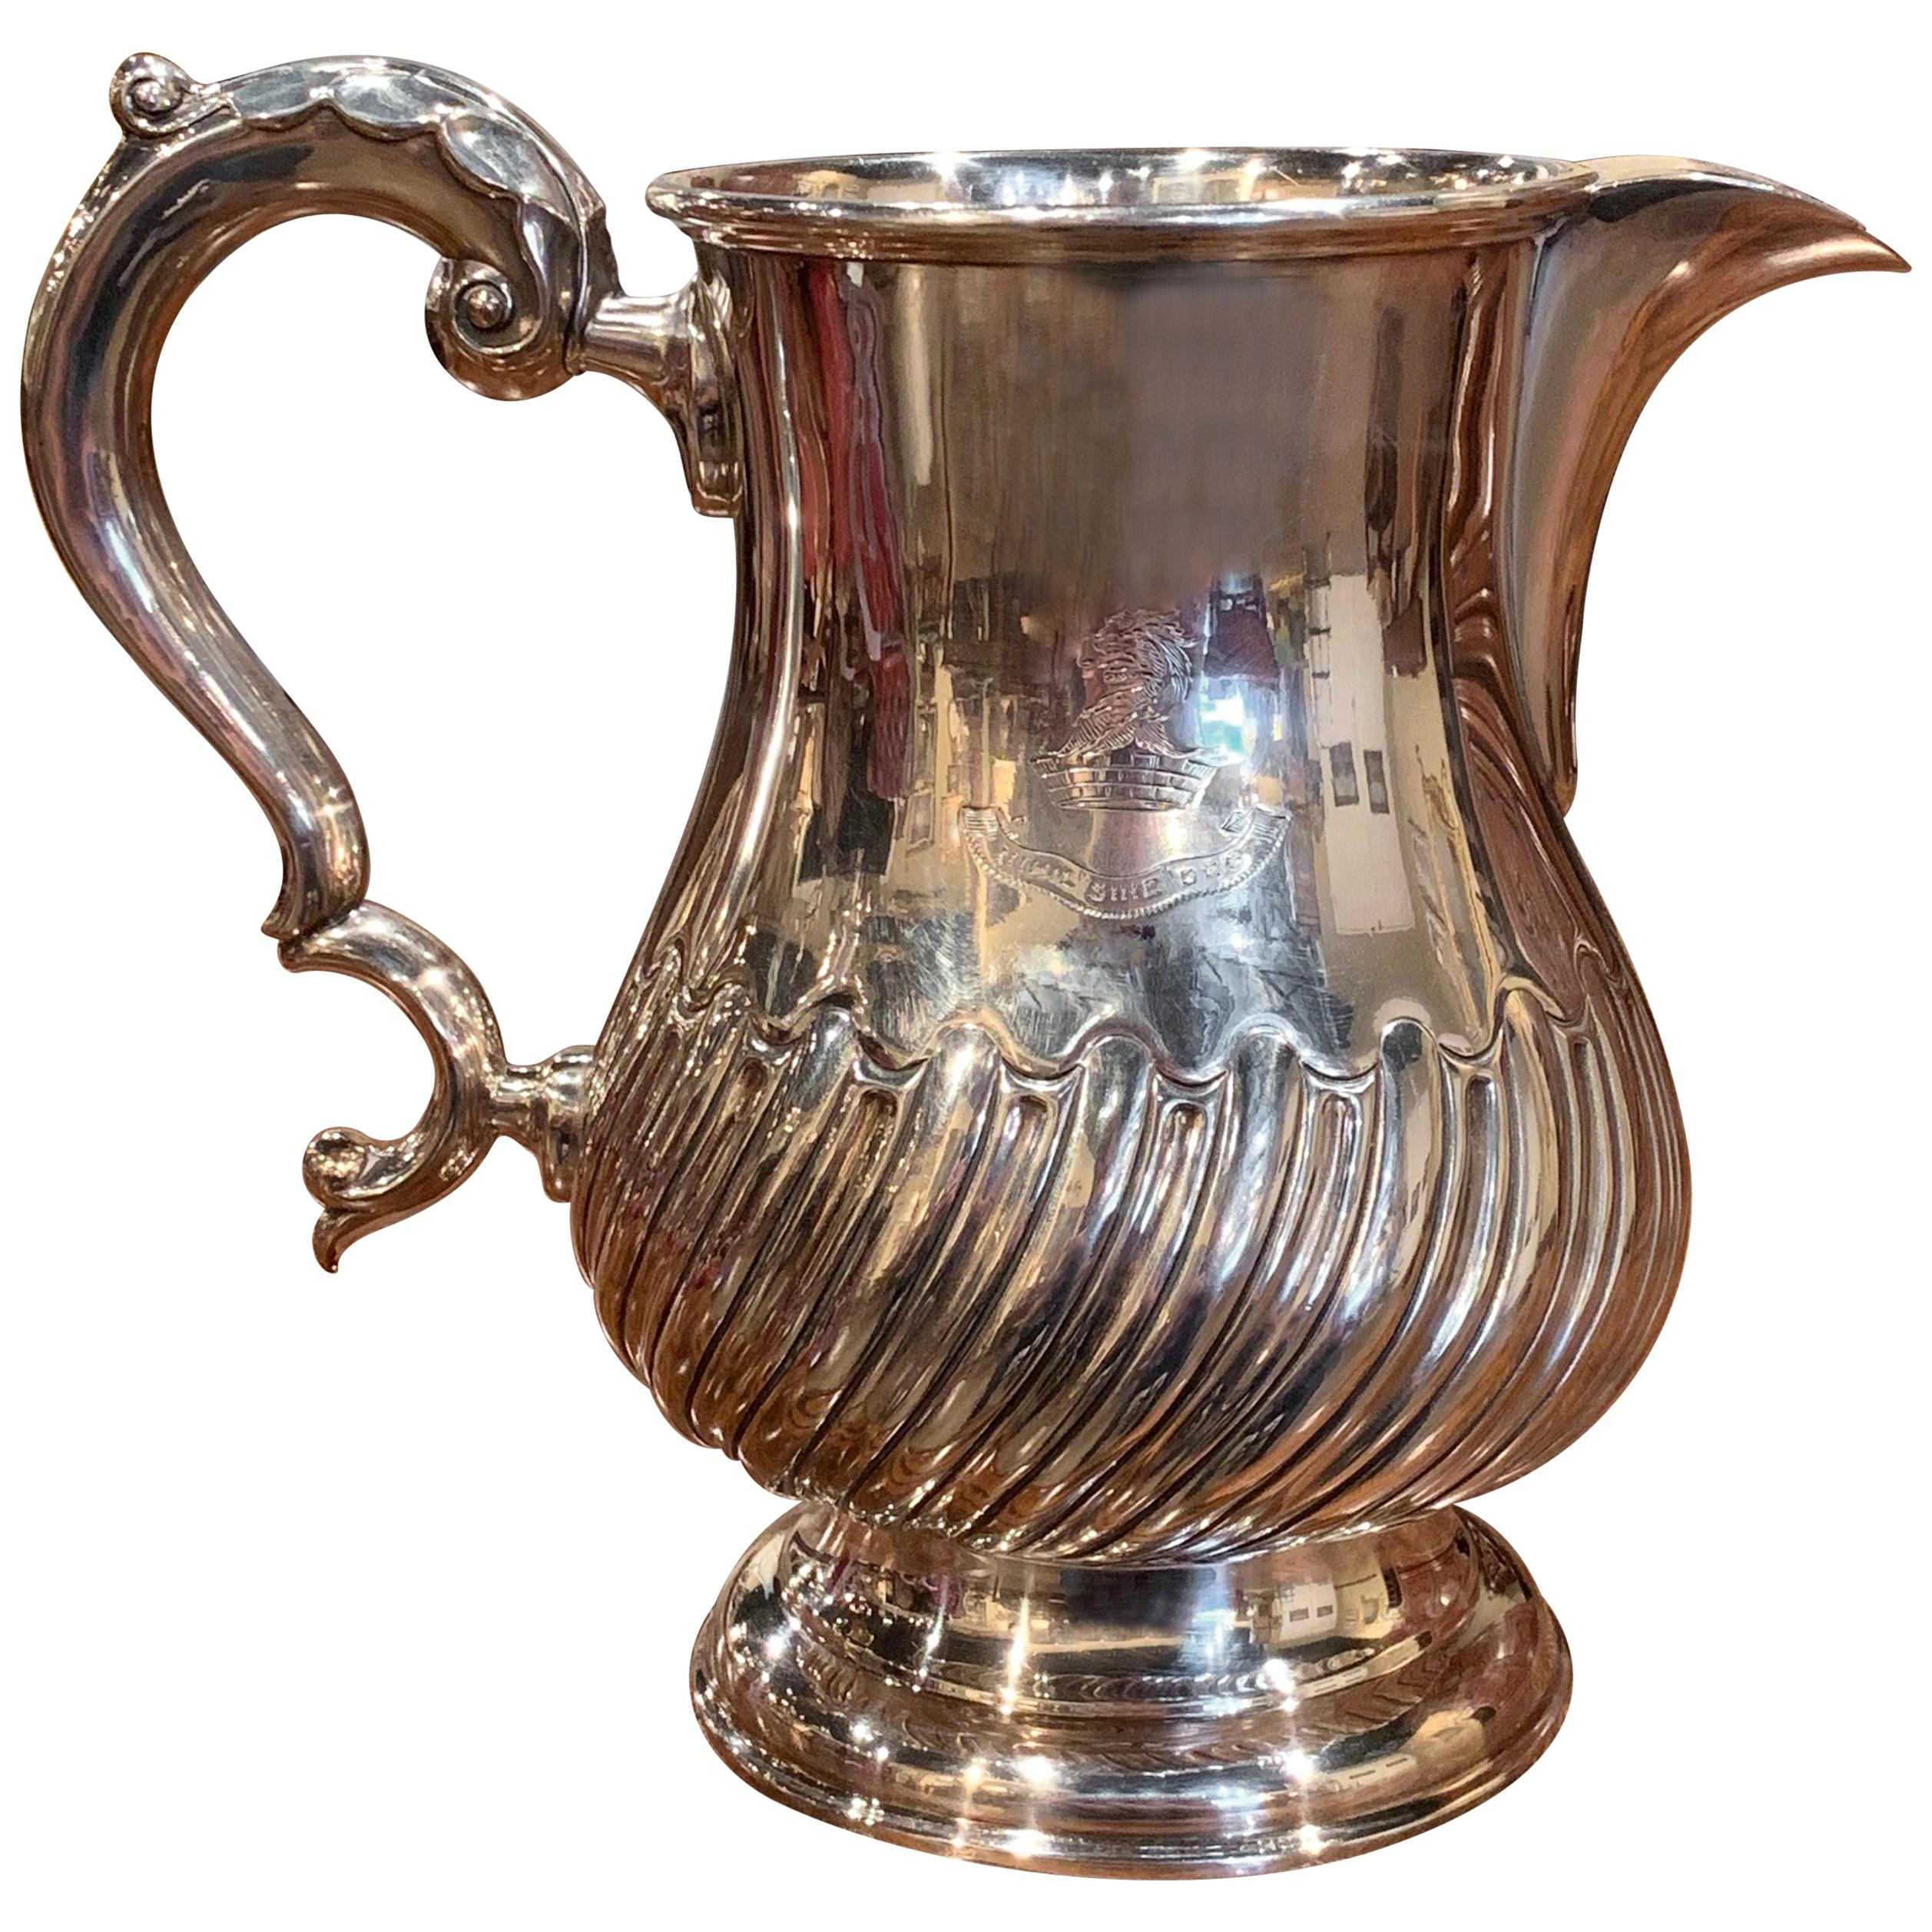 Early 20th Century English Silver Plated Pitcher with Engraved Crest